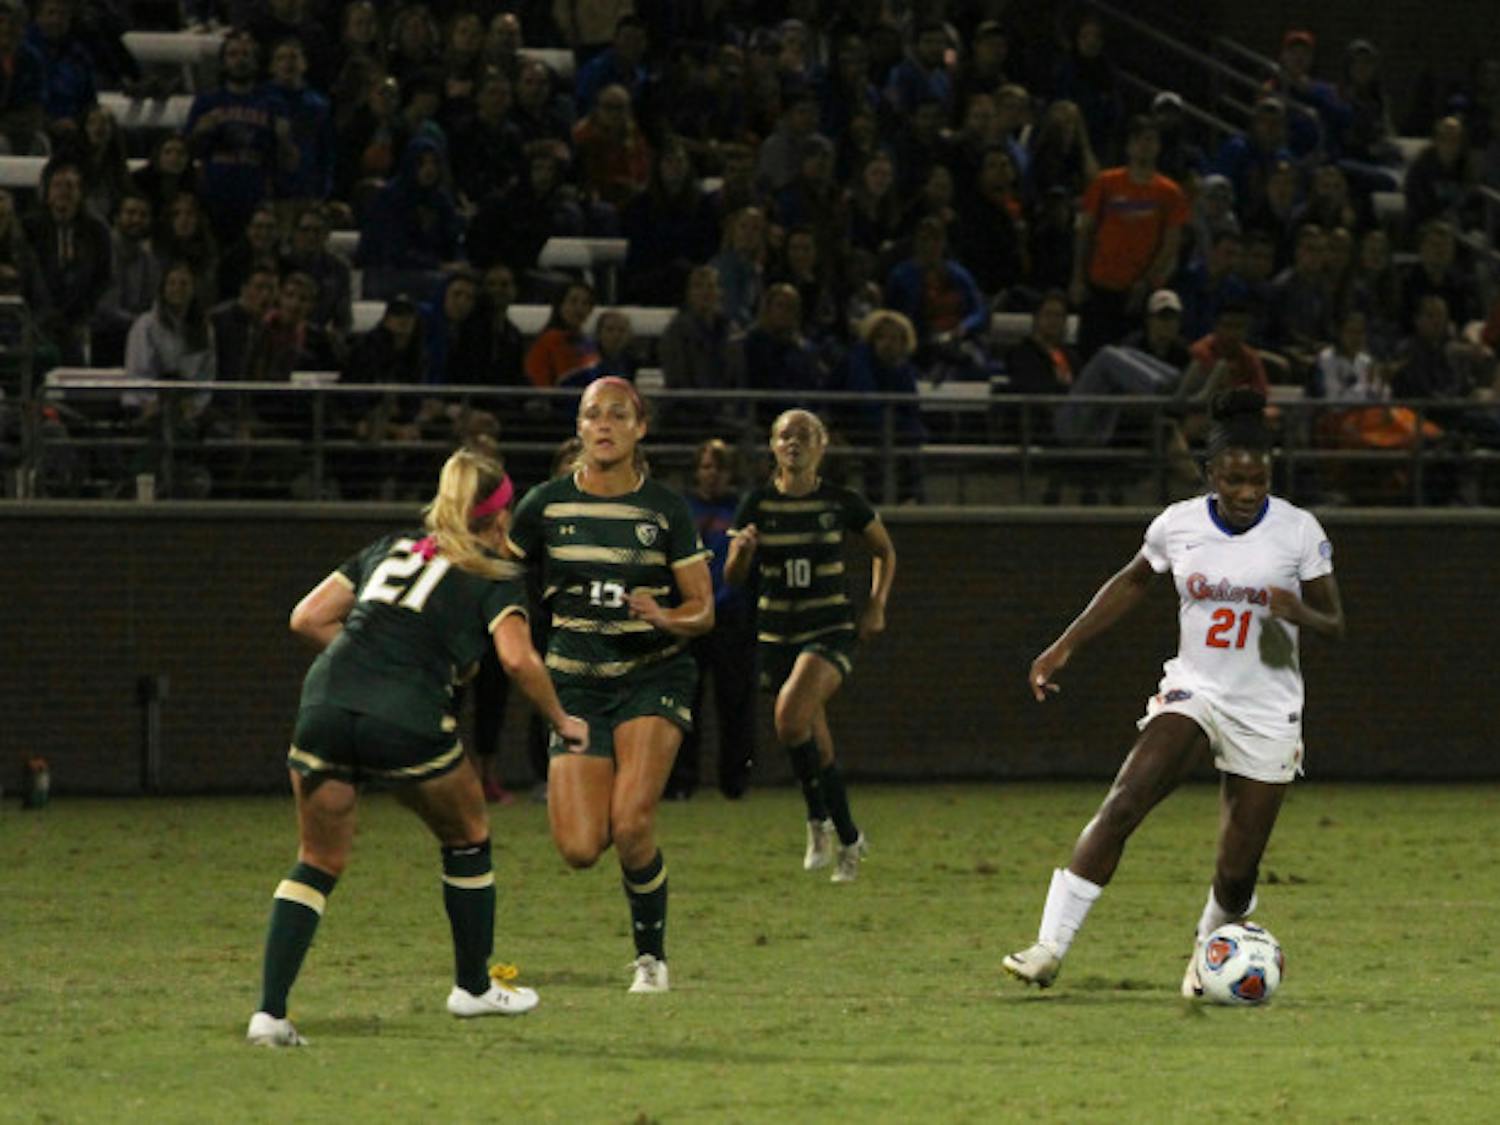 Despite making her return to the field against Florida State, UF forward Deanne Rose couldn't provide an offensive spark, as the Gators lost 1-0 and failed to score for the fifth-straight game. 